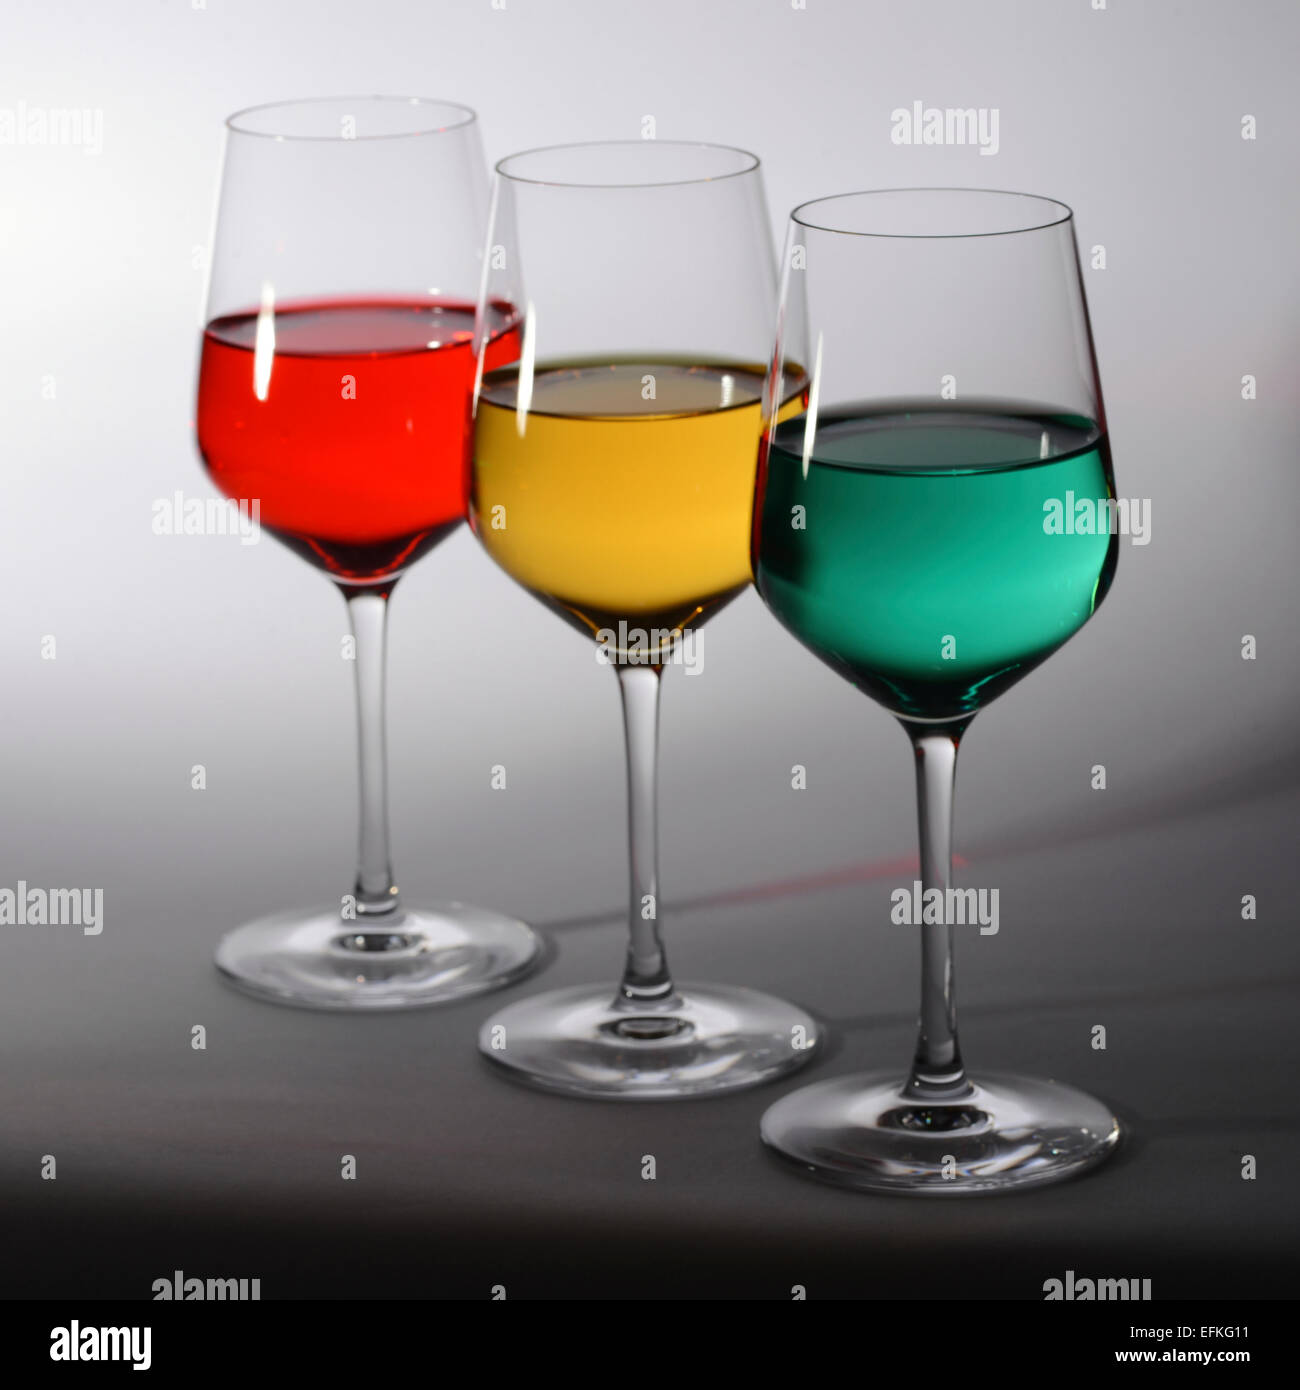 Three Wine Glasses Filled With Red Yellow And Green Colored Liquid Stock Photo Alamy